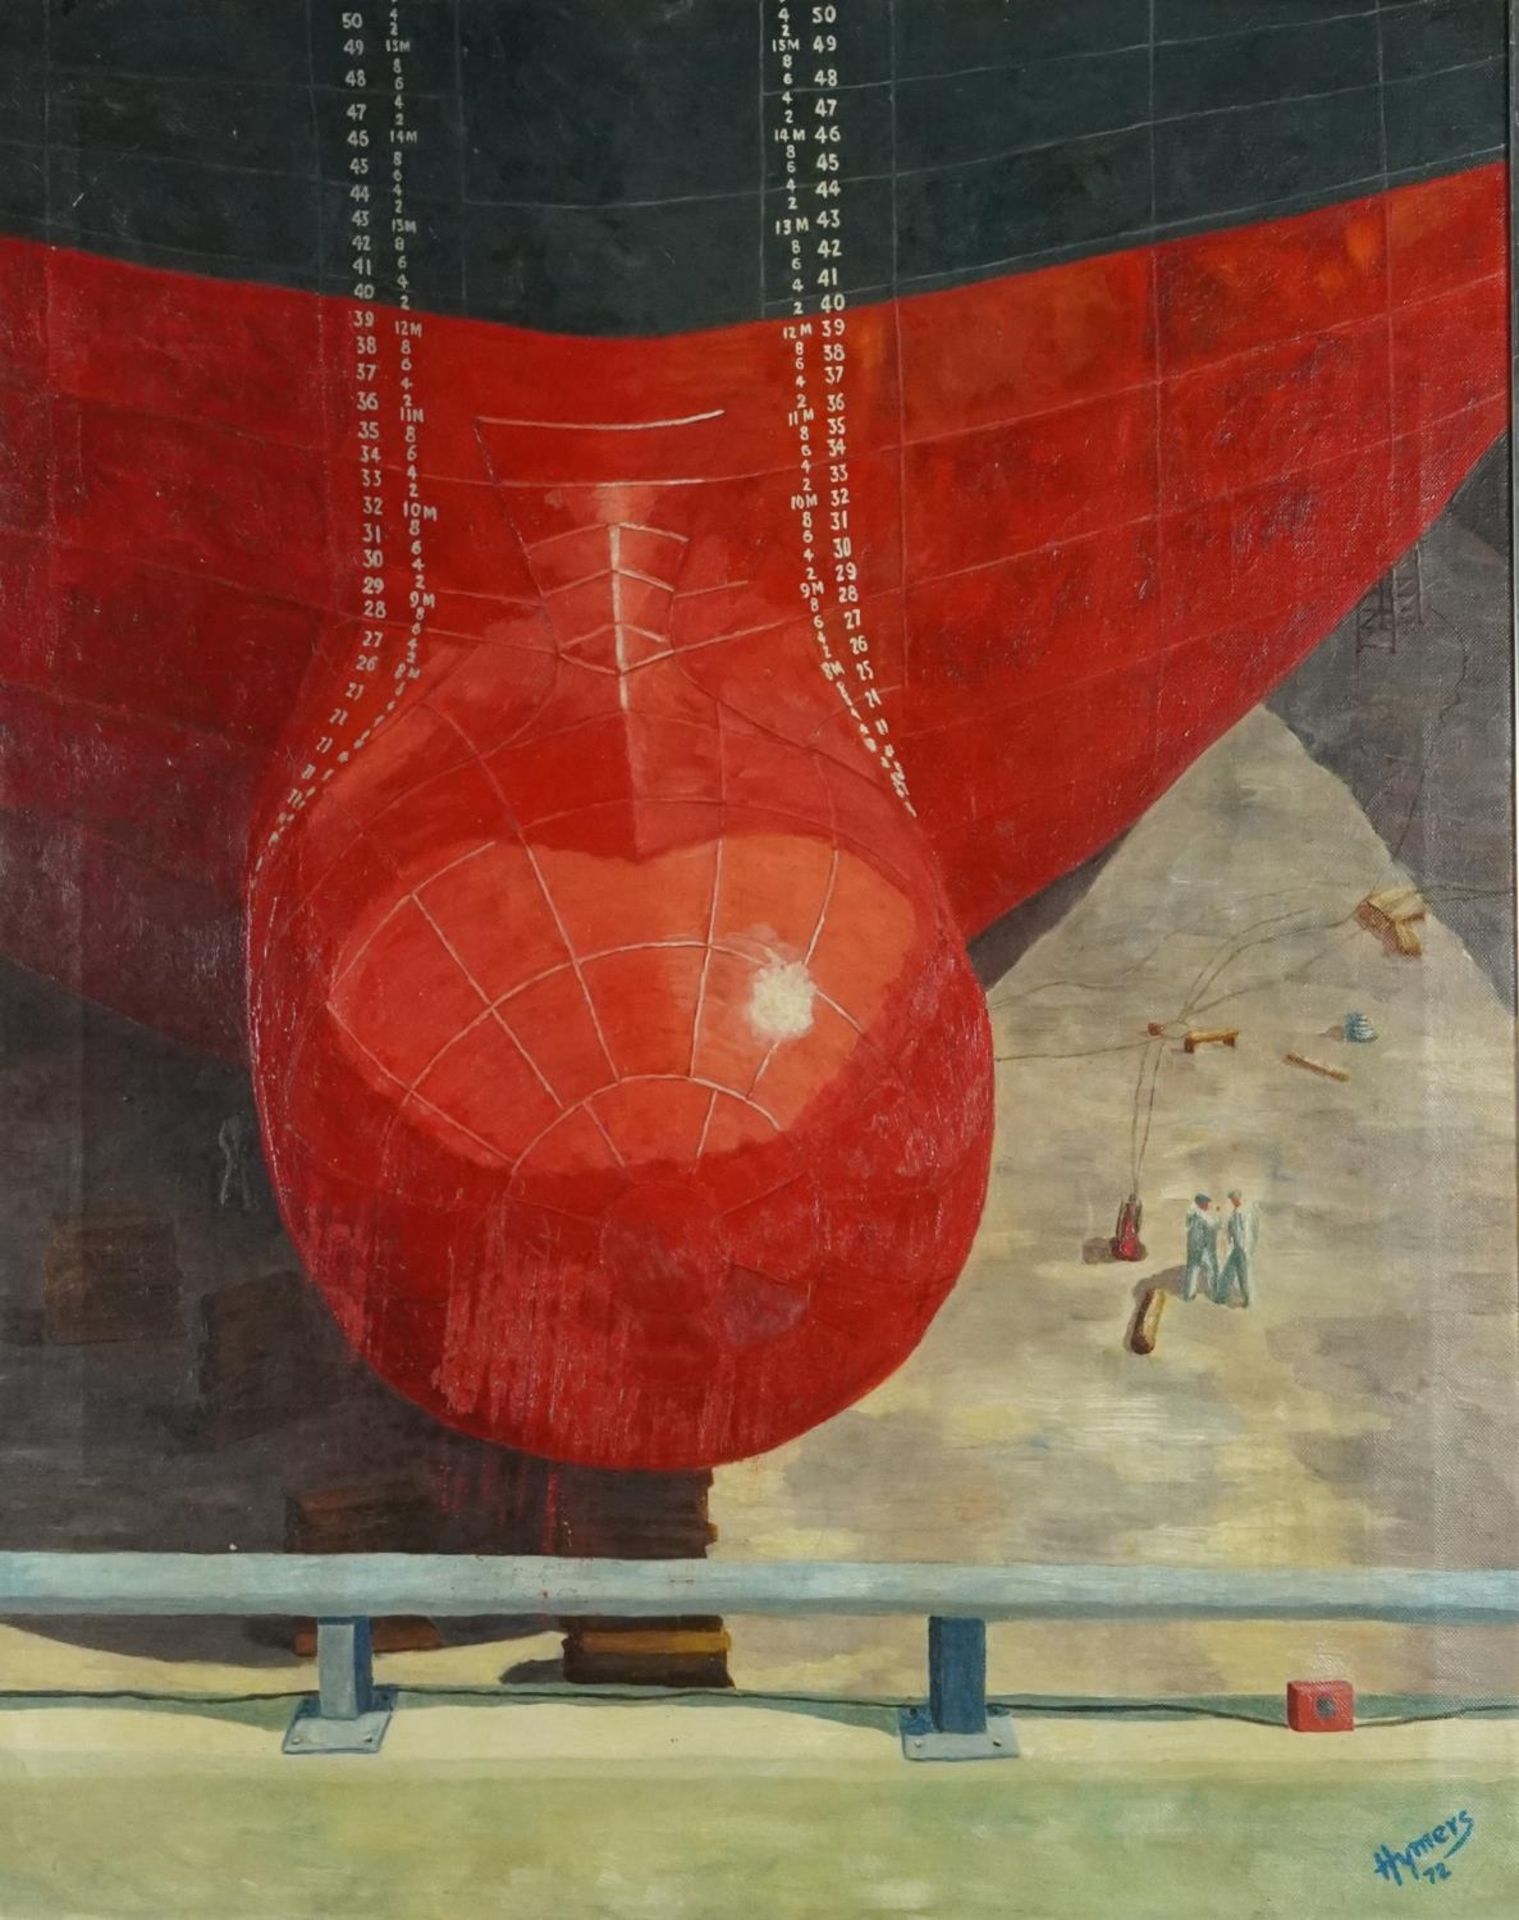 Hymers 1972 - Harland & Wolff shipped docked, oil on canvas, inscribed verso, framed, 76cm x 60cm